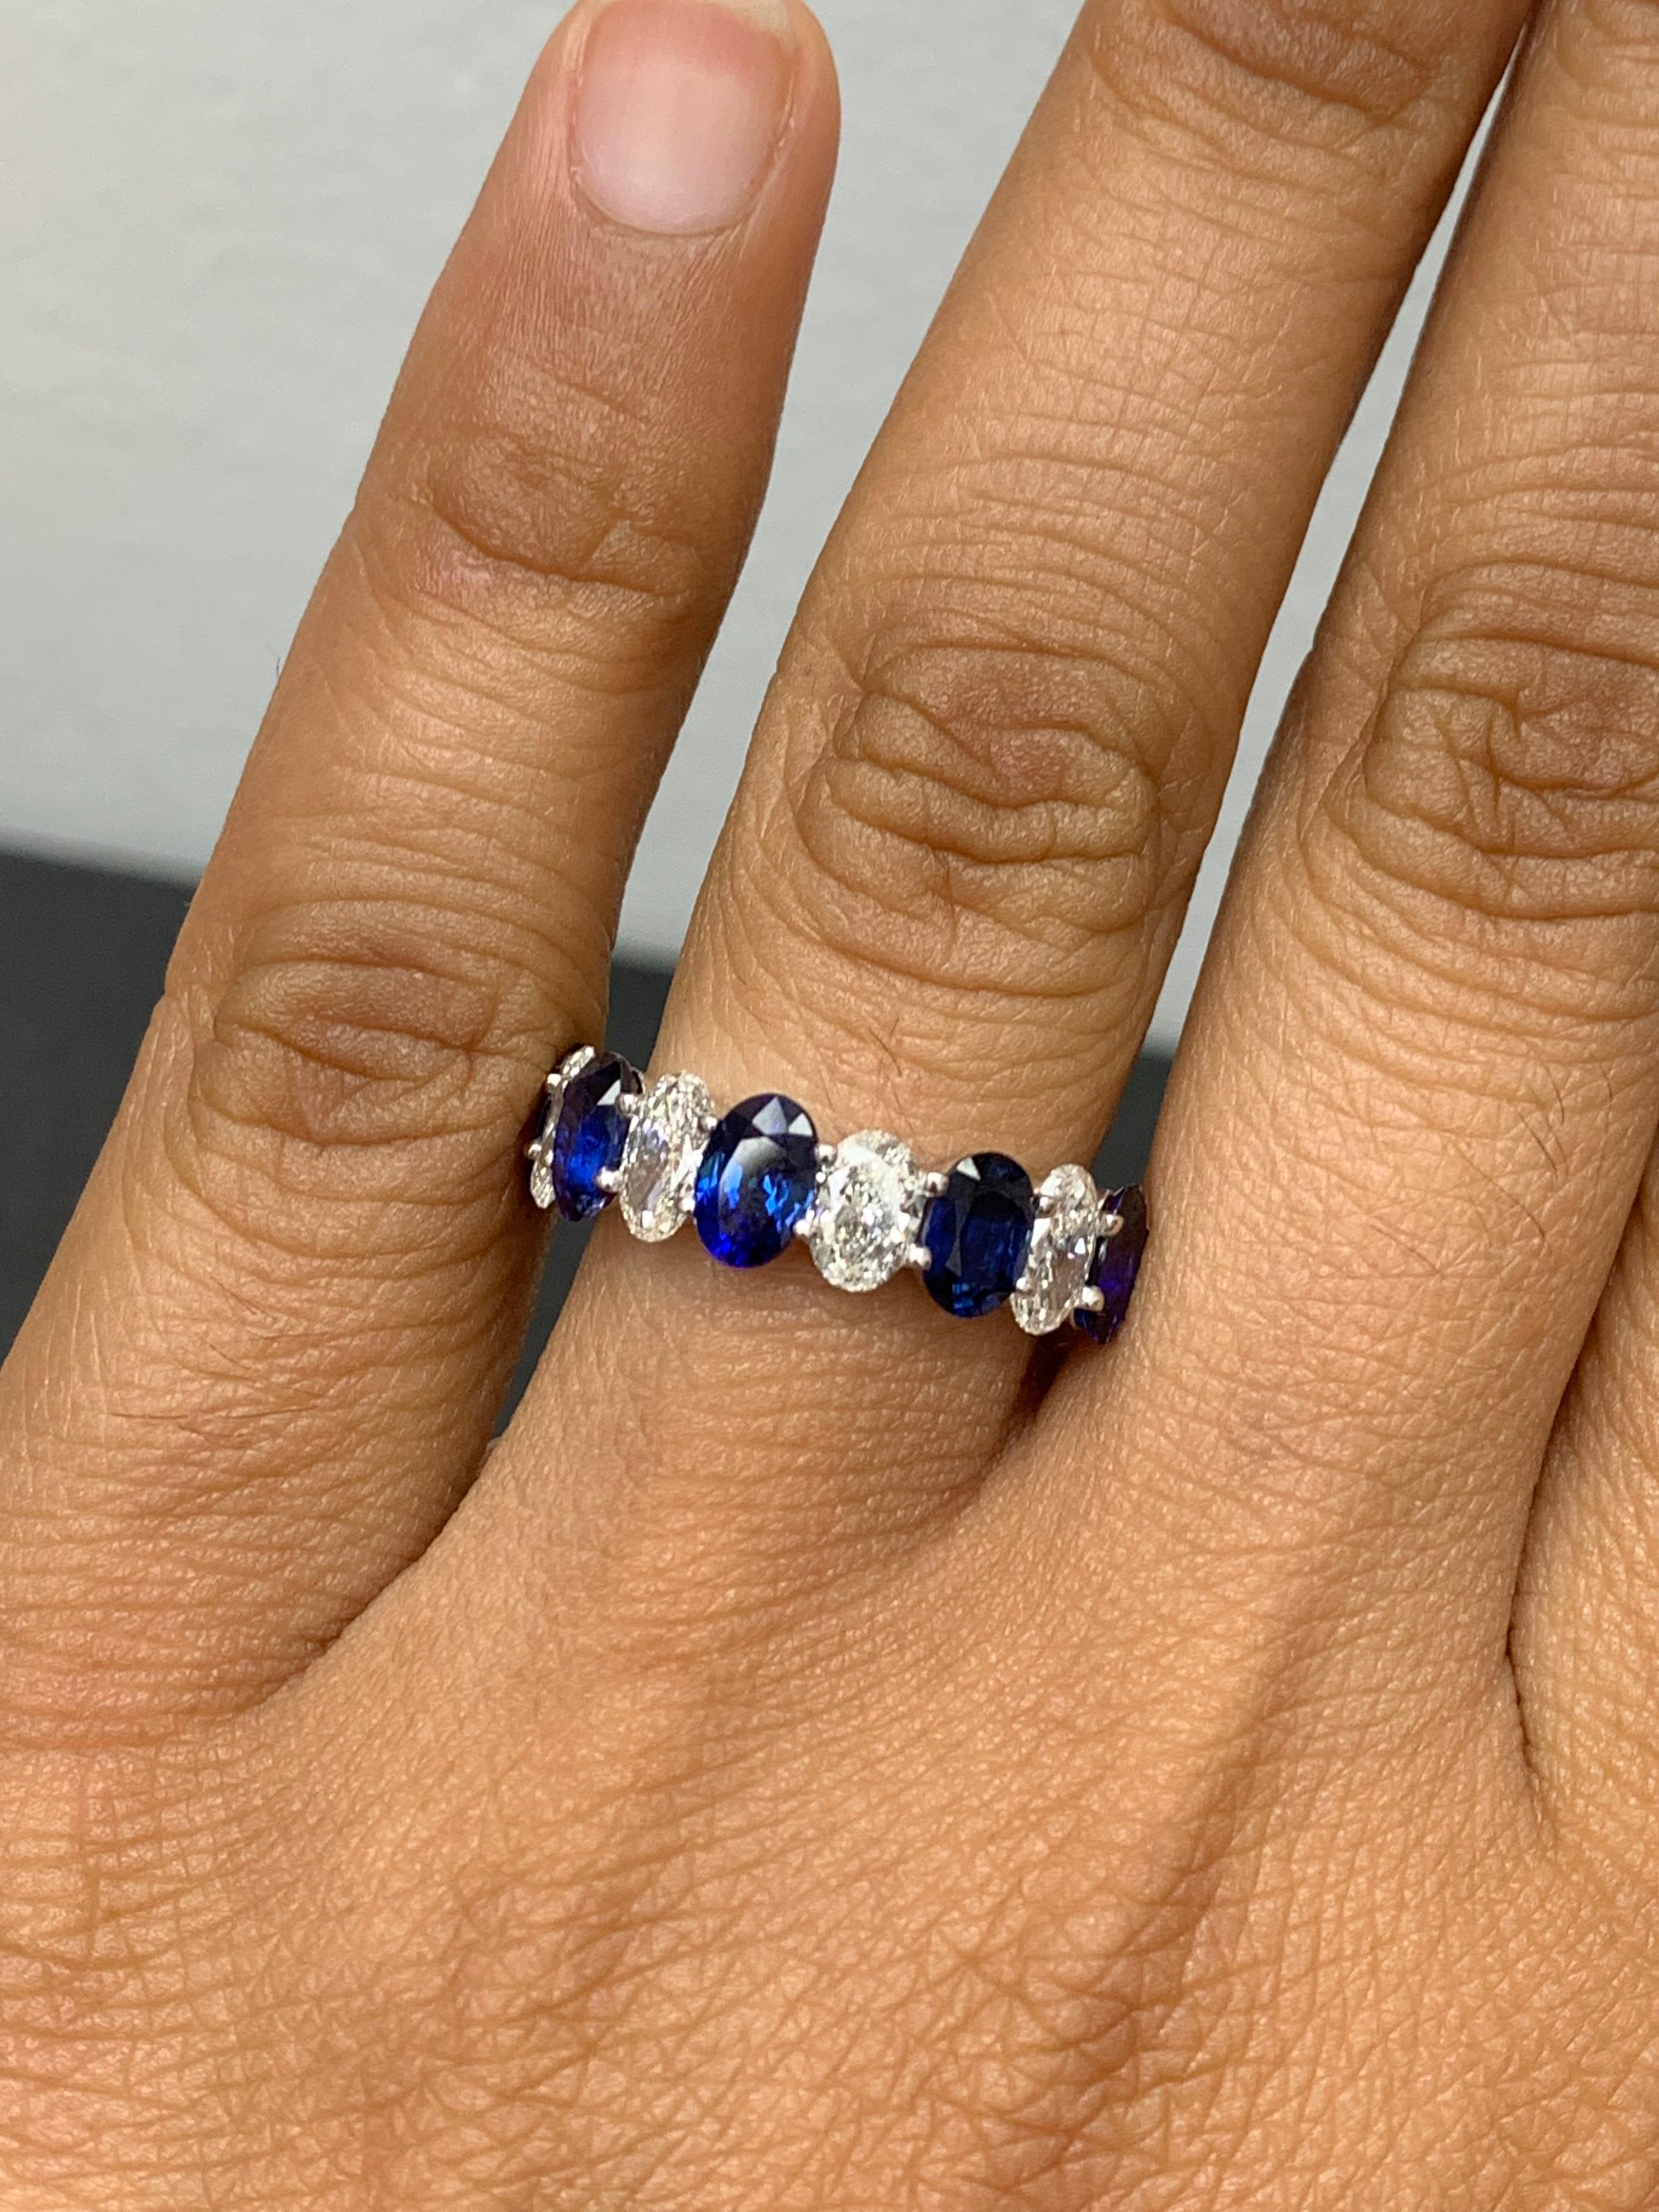 A fascinating gemstone wedding band 9 stone style showcasing 5  oval cut royal blue sapphires weighing 3.10 carats total, alternating to these blue sapphires are 4 oval cut brilliant colorless diamonds weighing 1.26 carats, Made in 14K White Gold,